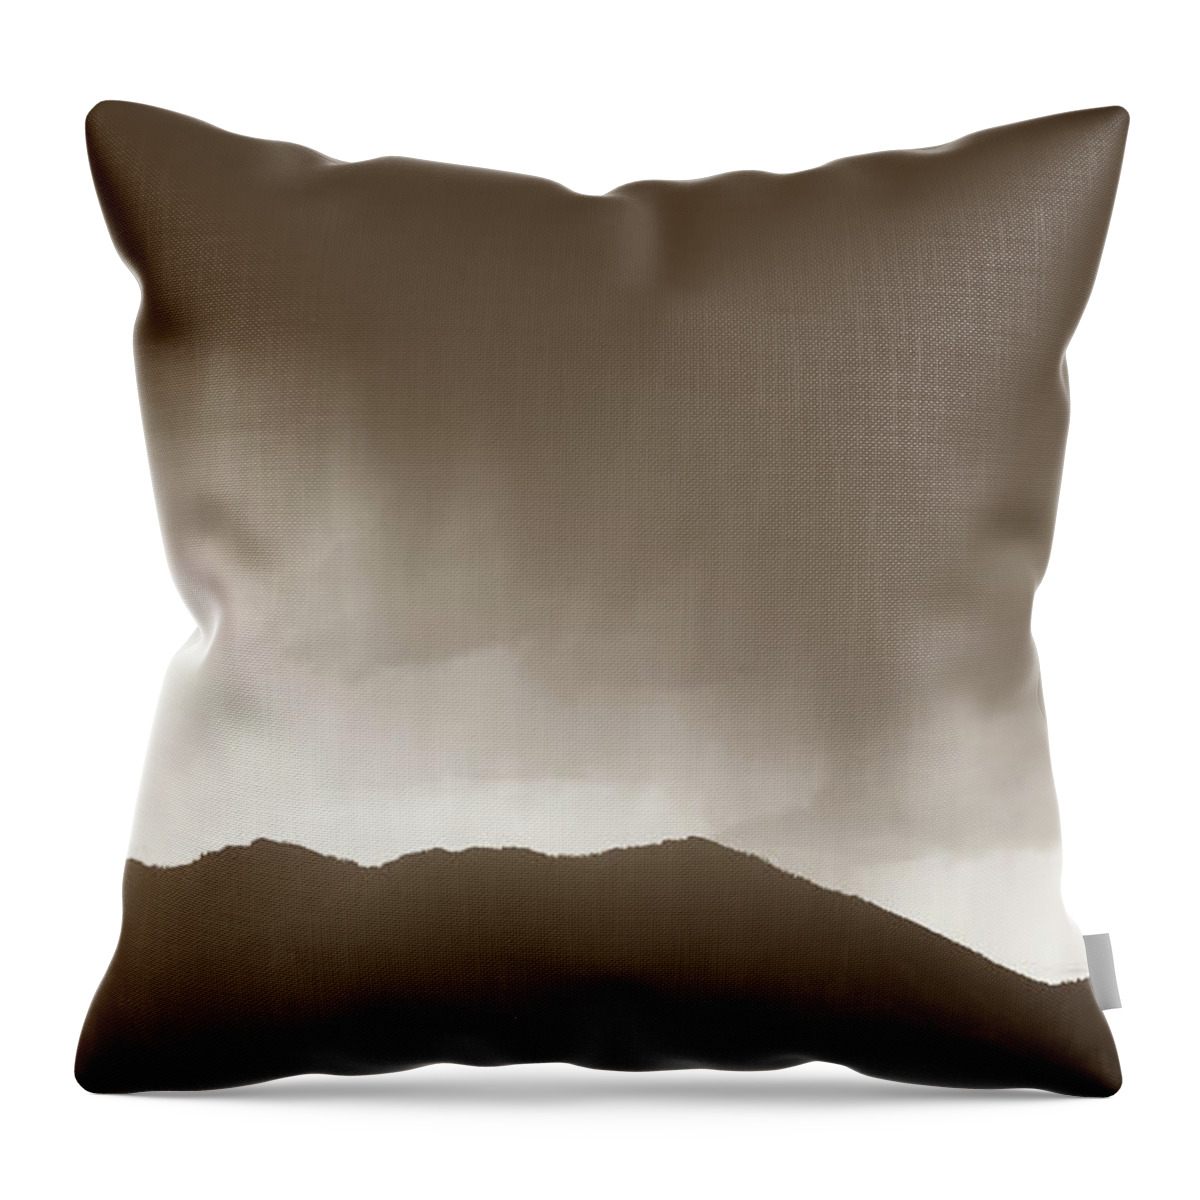 Flatirons Throw Pillow featuring the photograph Rain Over Flatirons by Marilyn Hunt